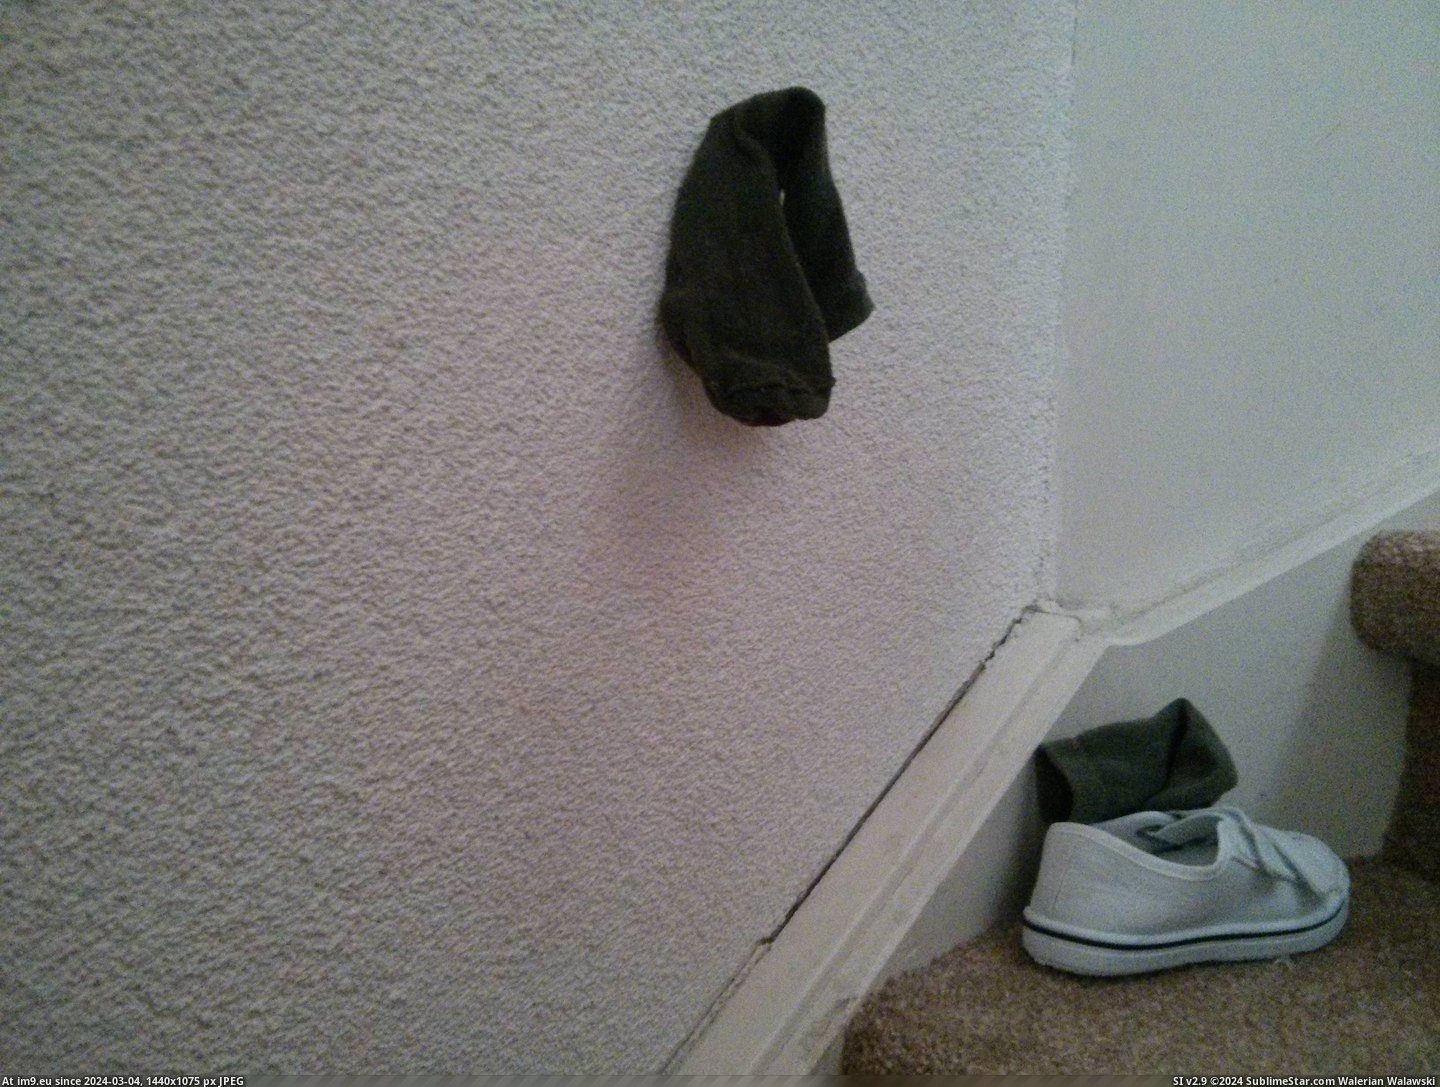 #One #Wall #Stairs #Tossed #Sticked #Son #Socks [Mildlyinteresting] When I tossed my son's socks on the stairs one of them sticked to the wall Pic. (Image of album My r/MILDLYINTERESTING favs))